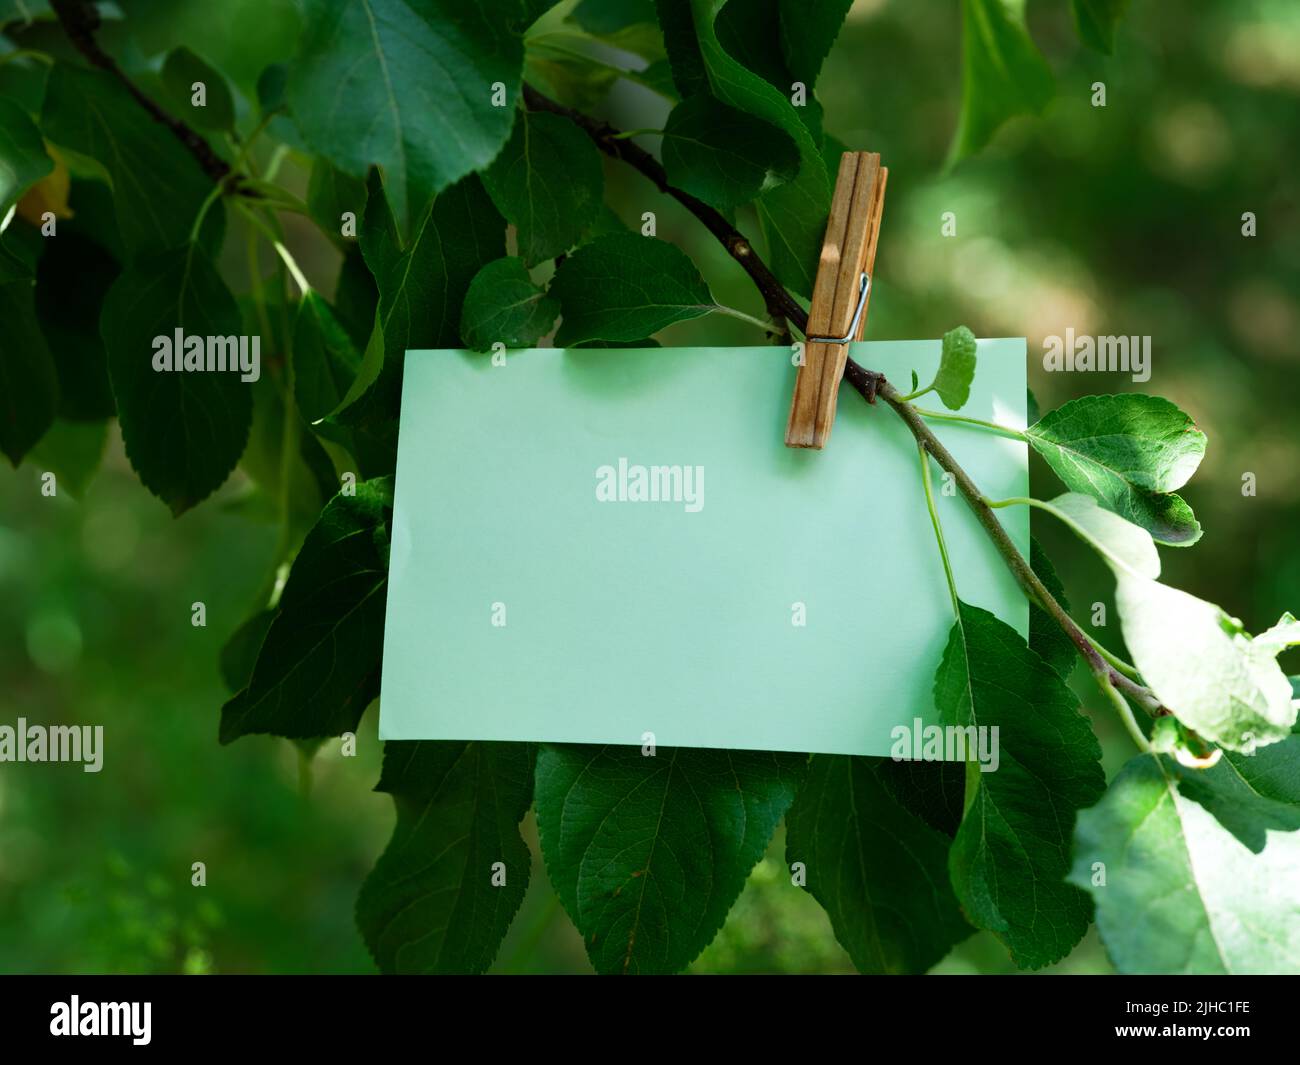 A green paper note hanging on a tree branch. Close-up. Stock Photo